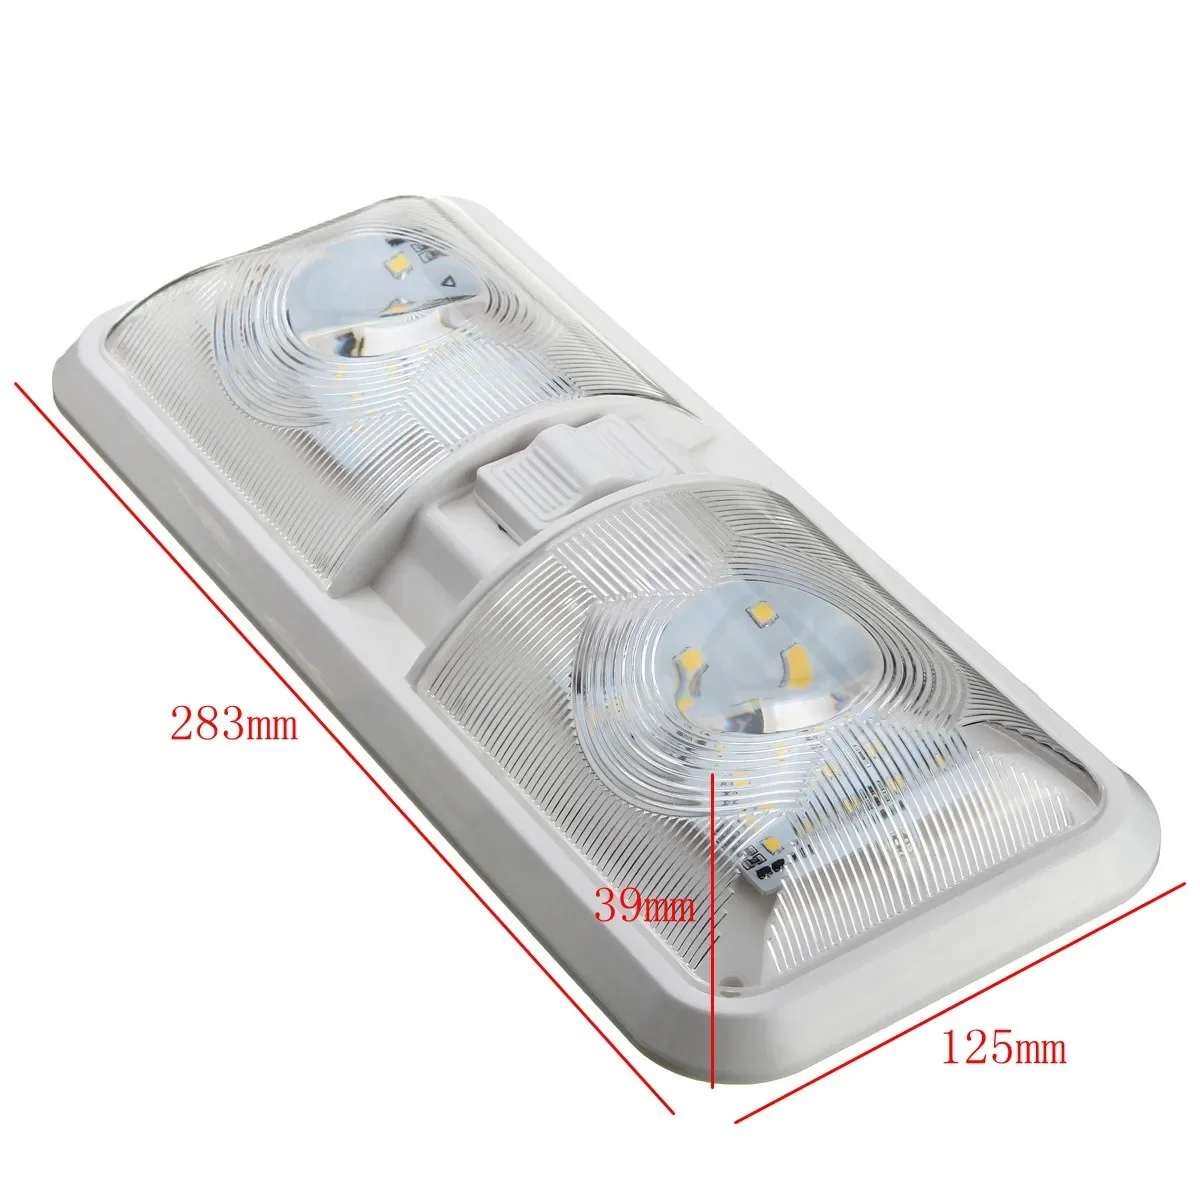 

Led RV Interior Ceiling Light Boat Camper 12V 550LM 2PCS Trailer Marine Double Dome Light With ON/OFF Switch